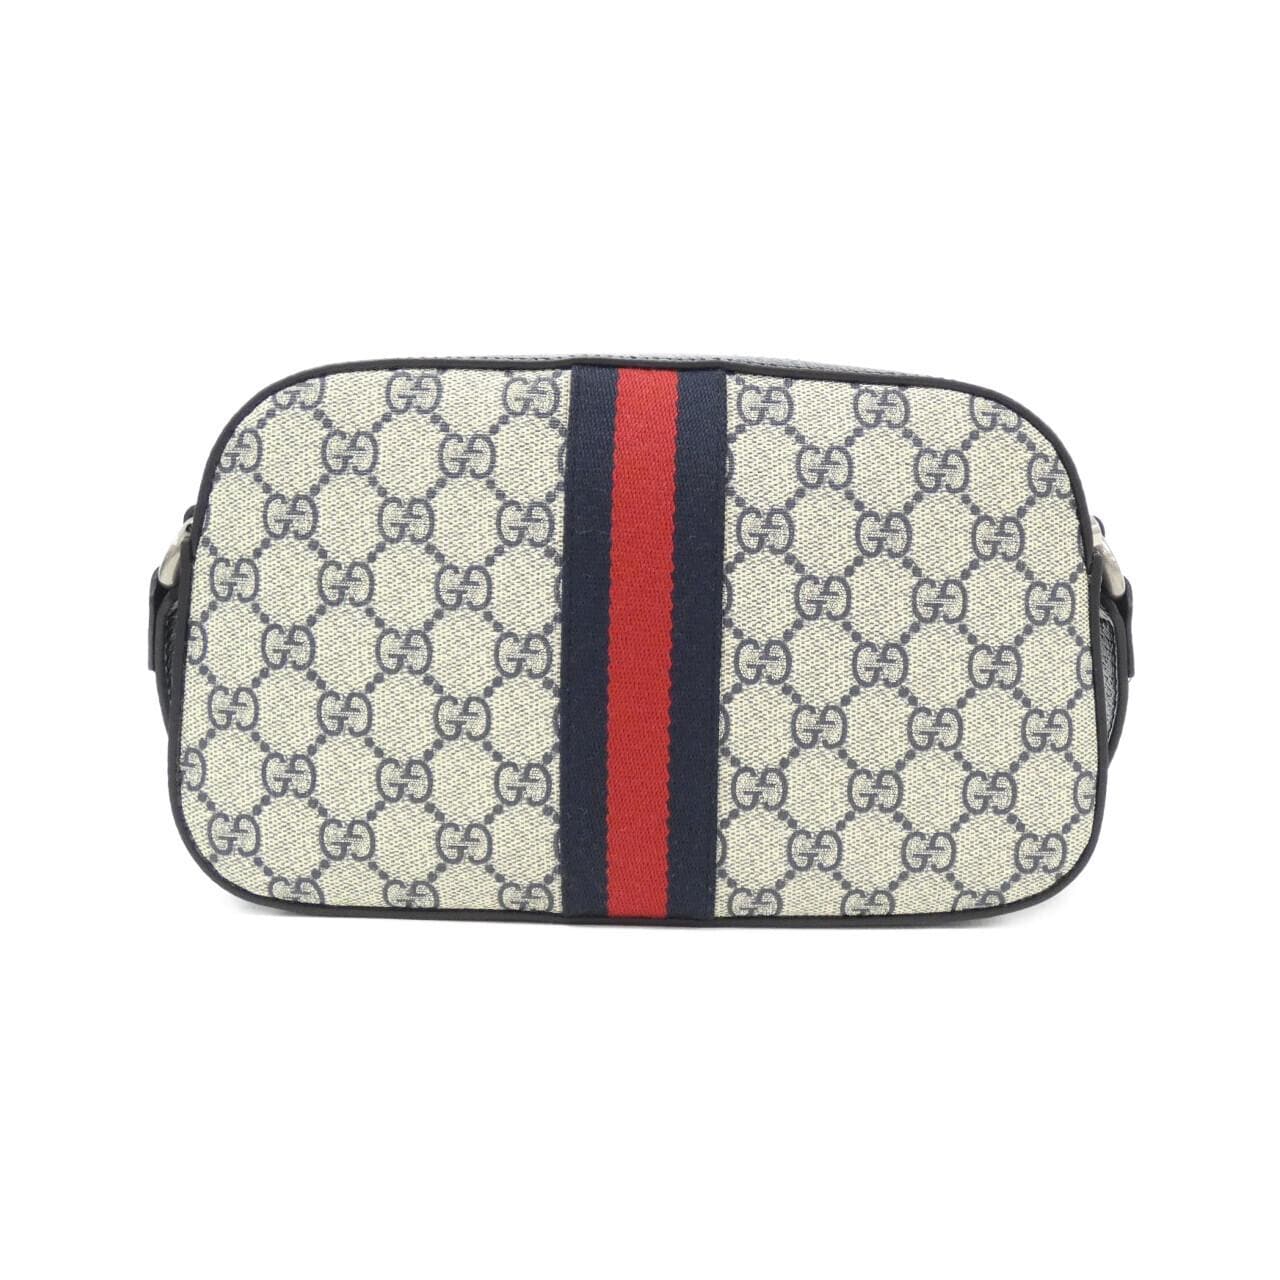 [BRAND NEW] Gucci OPHIDIA 681064 96IWN Shoulder Bag